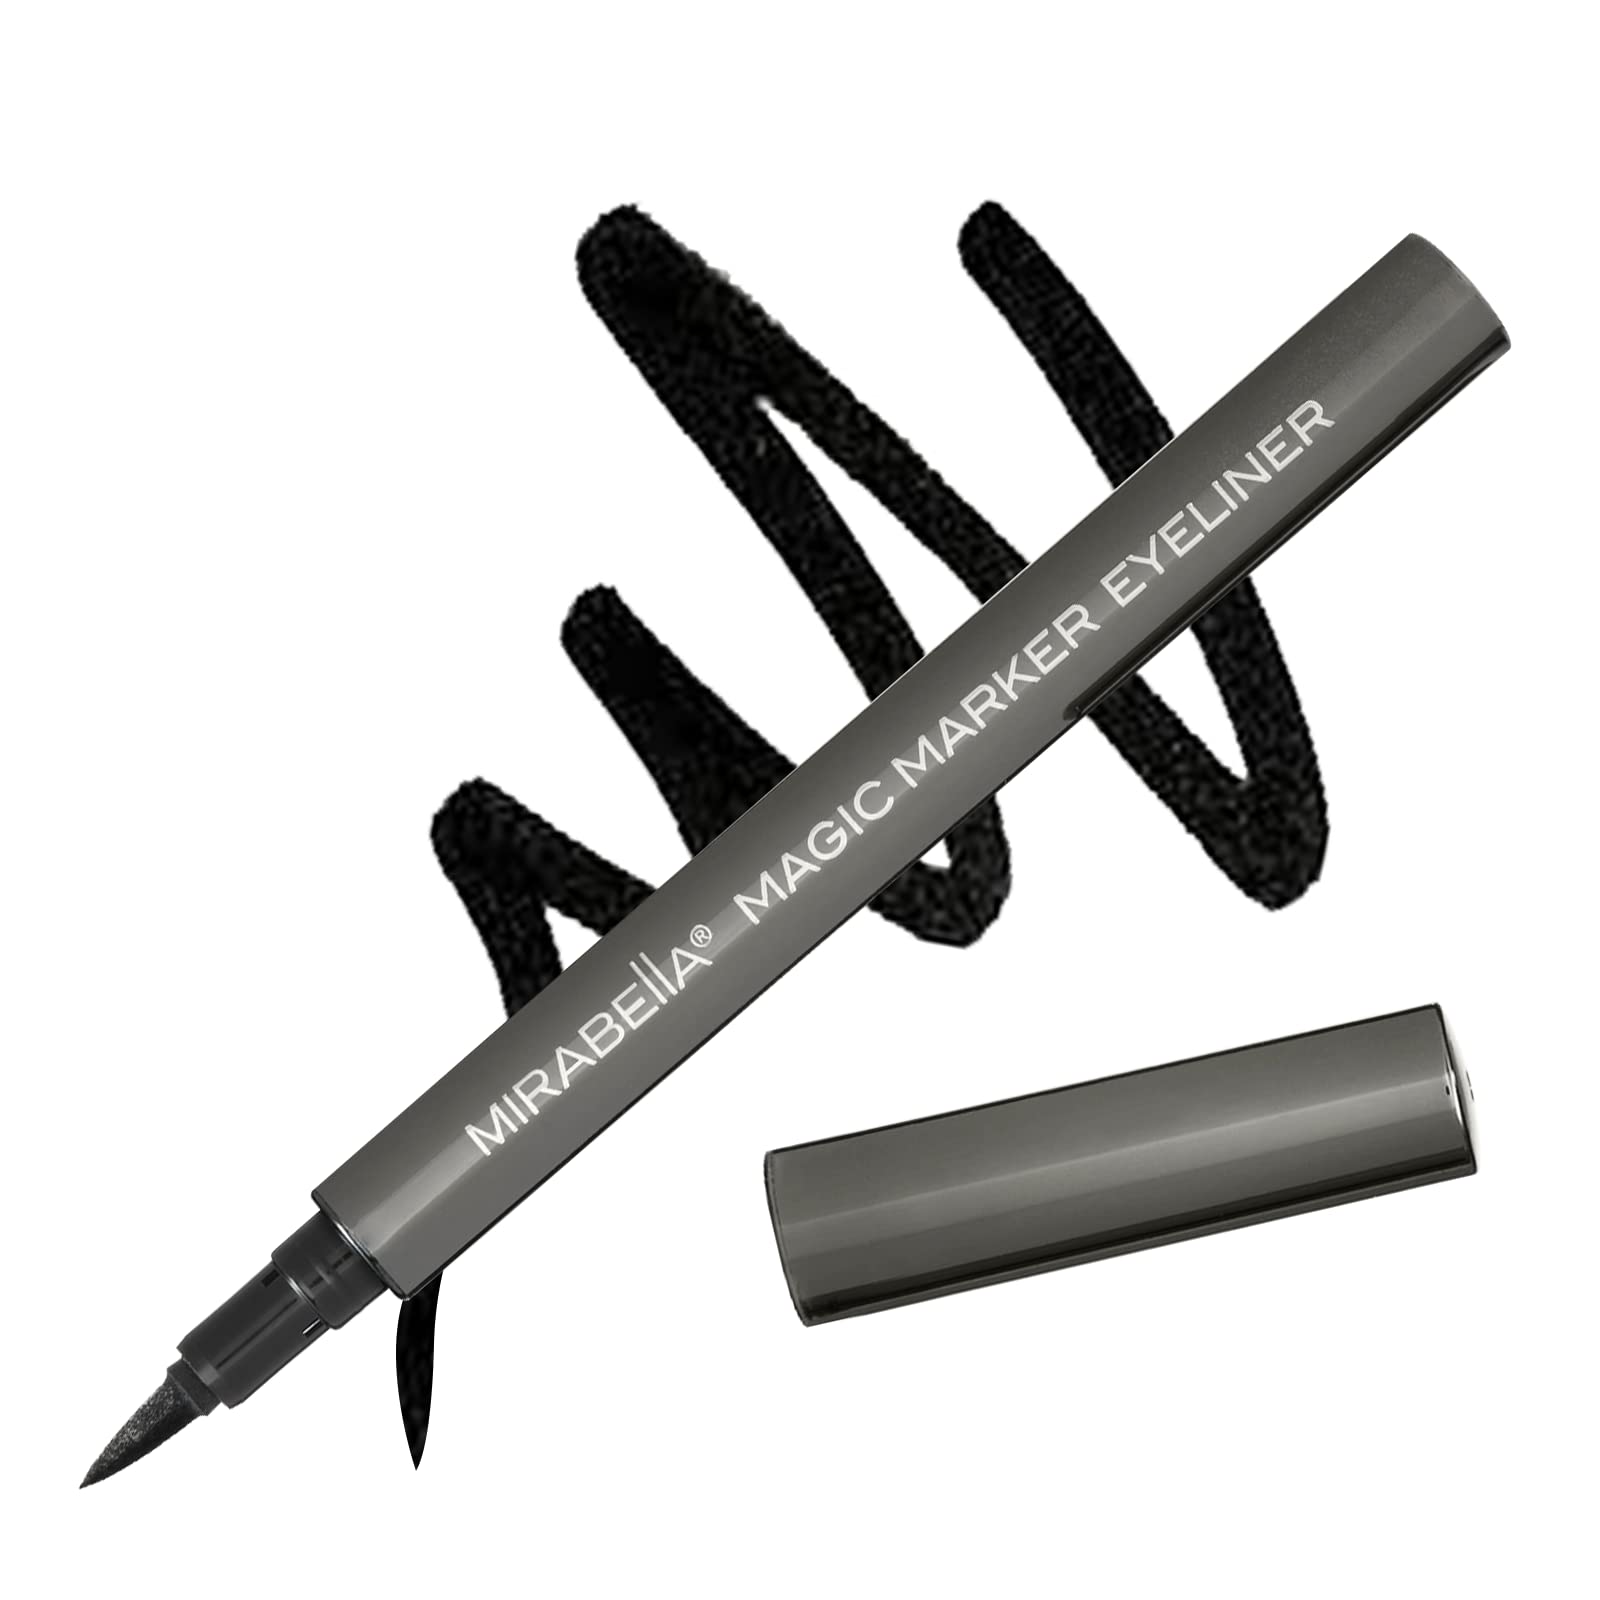 Mirabella Black Magic Marker Liquid Eyeliner - Perfect Brush-Tip for Precise and Controlled Application - Long-Lasting Liquid, Waterproof Color, Smudgeproof- No Tugging, Skipping, or Flaking